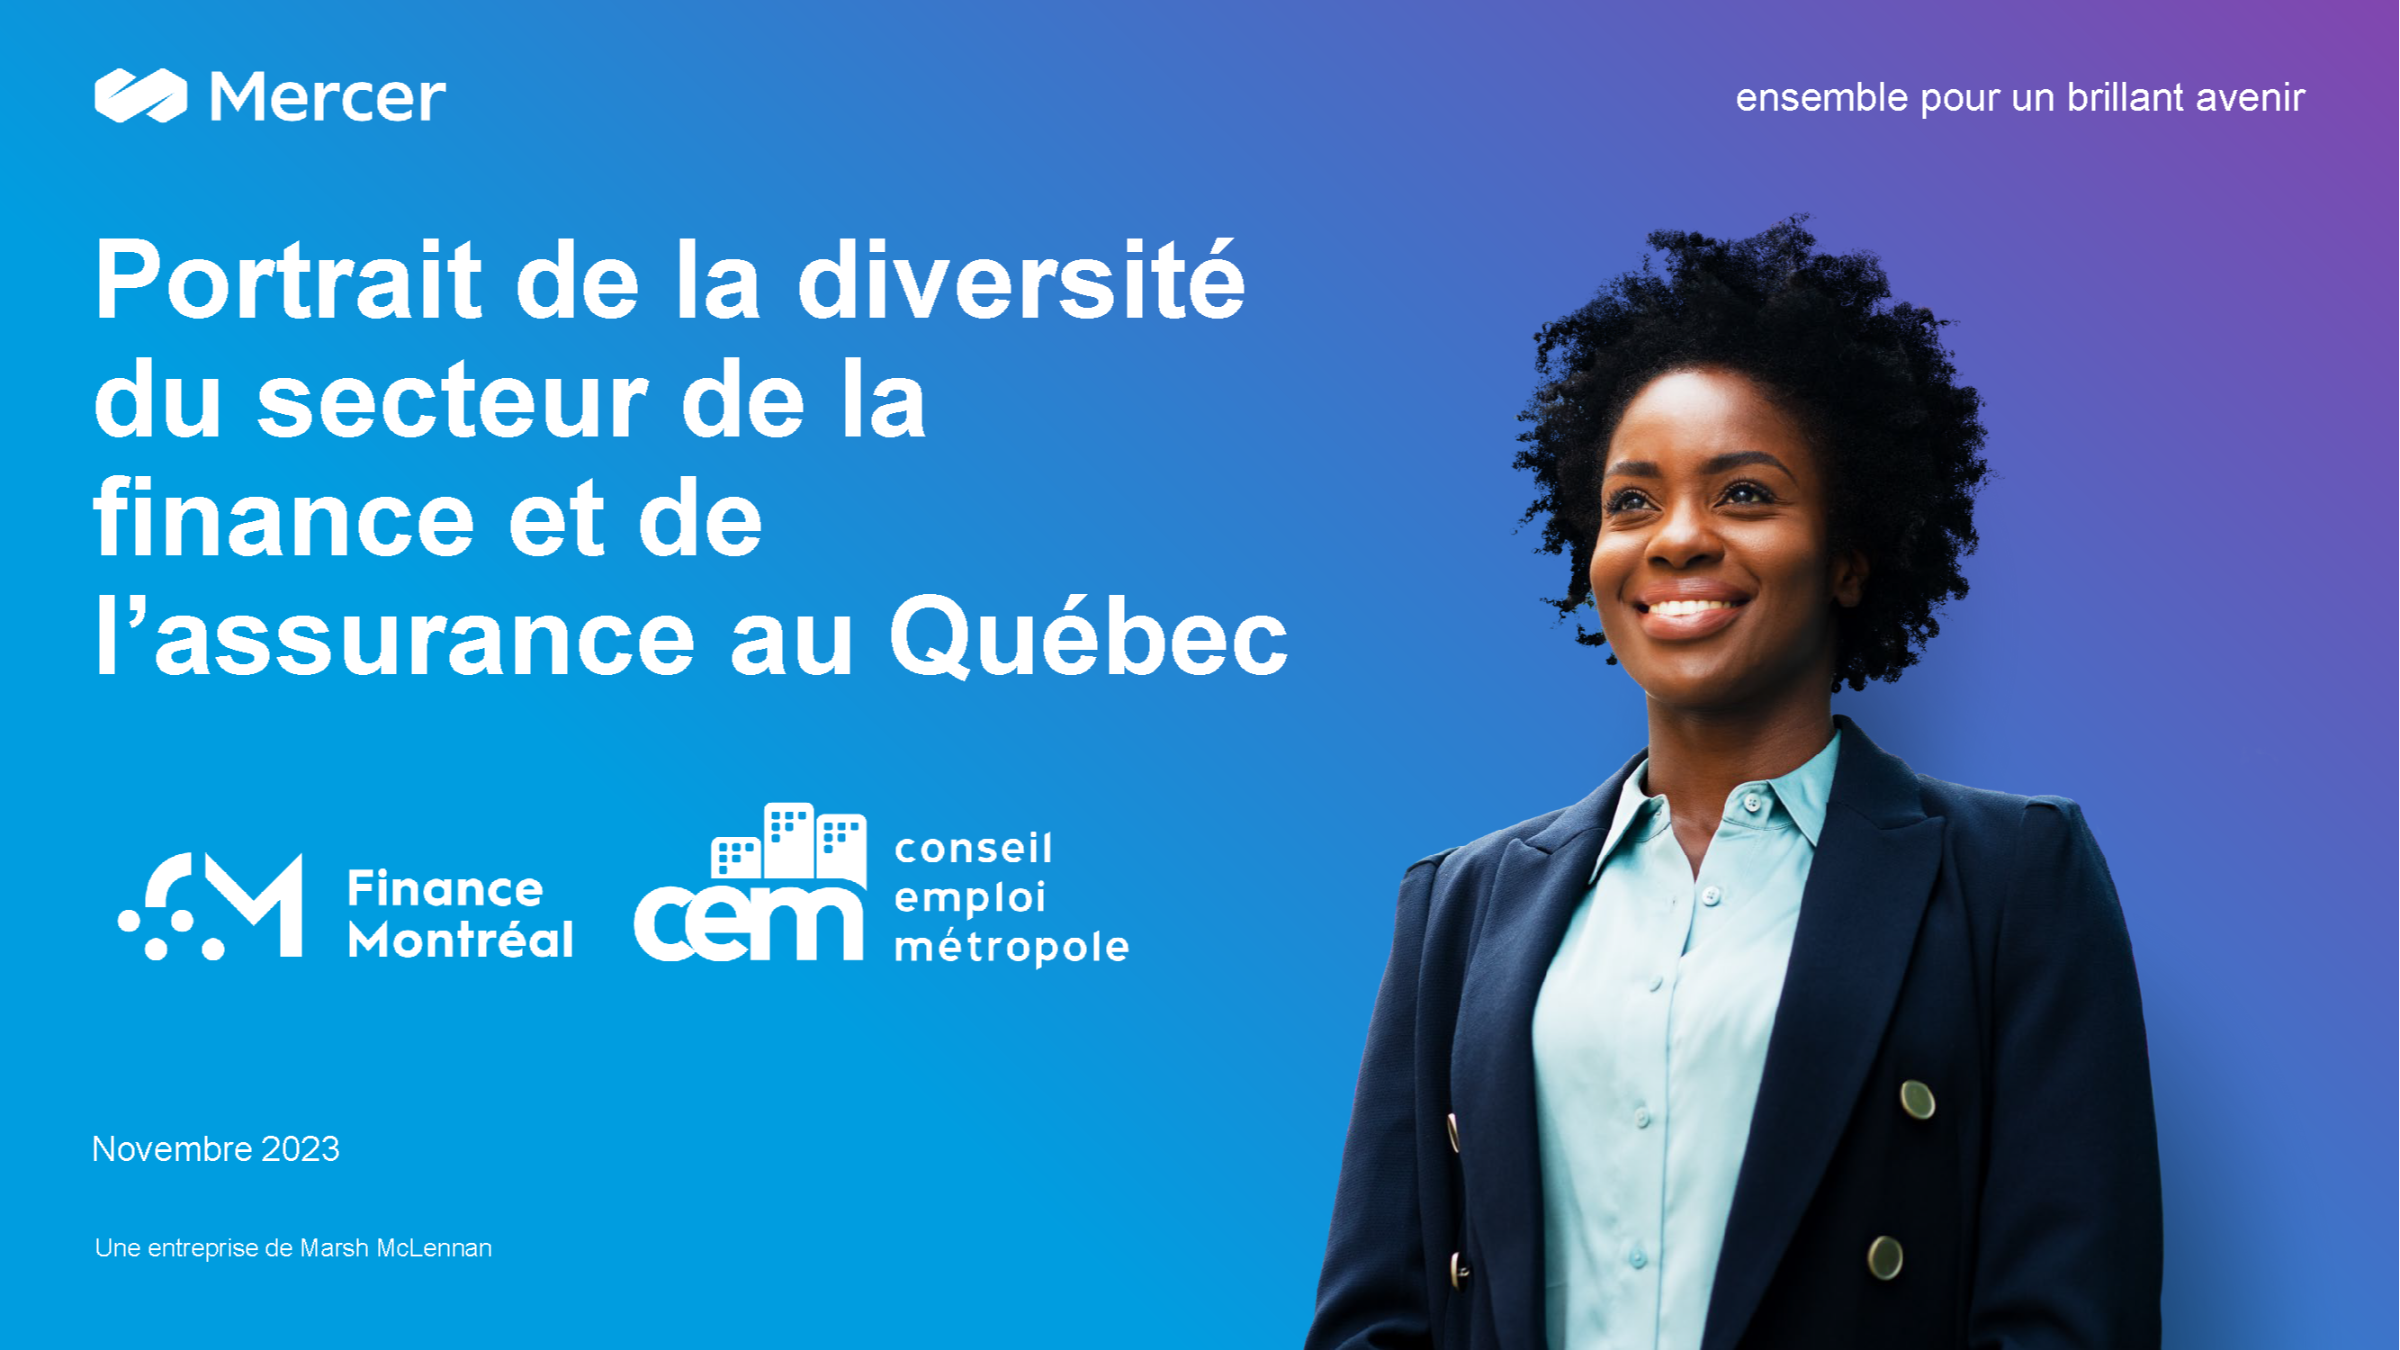 Diversity Portrait of Quebec's Finance and Insurance Sector (November 2023) [in French]